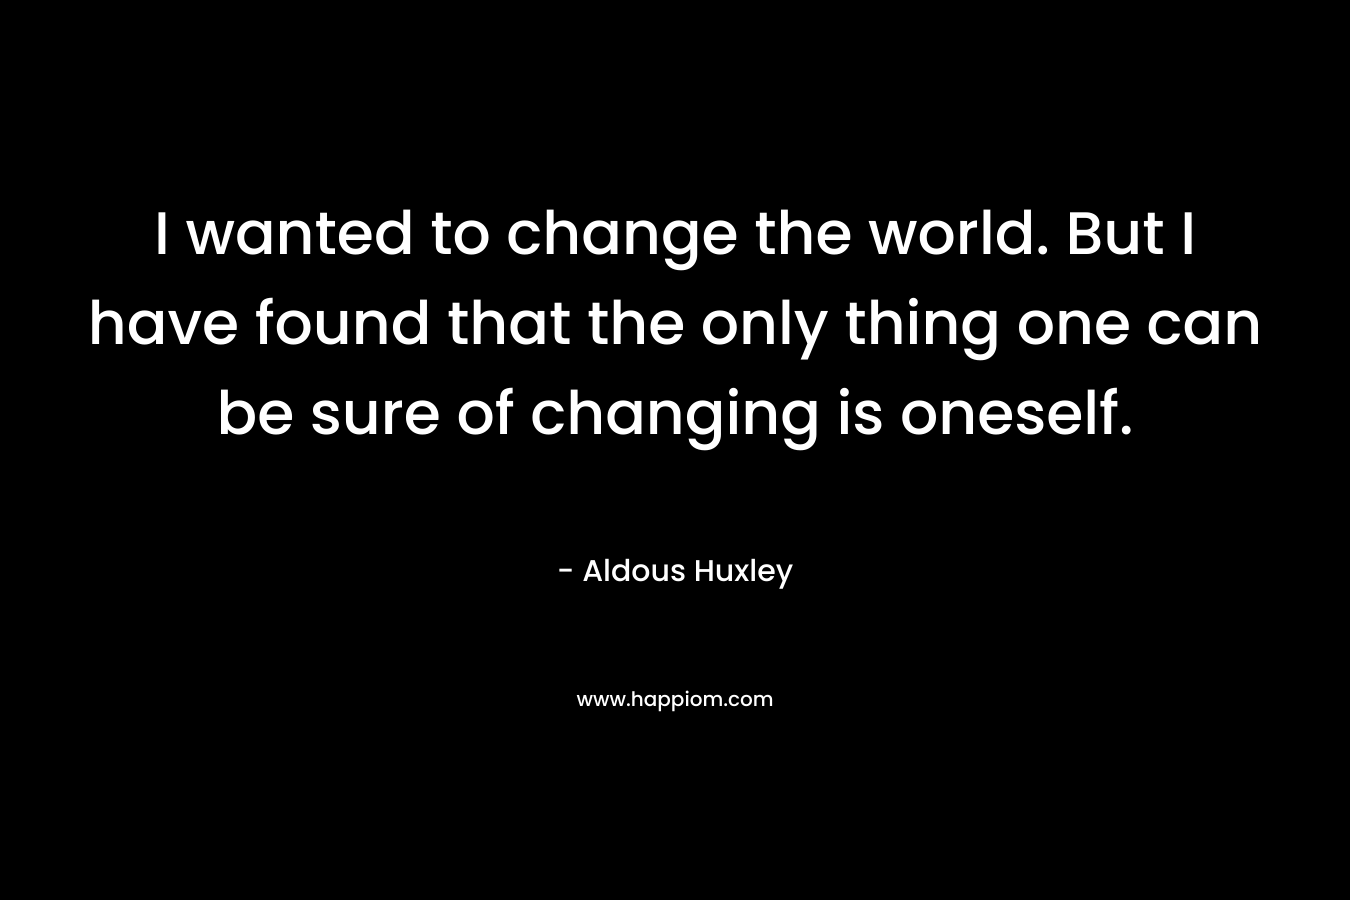 I wanted to change the world. But I have found that the only thing one can be sure of changing is oneself.